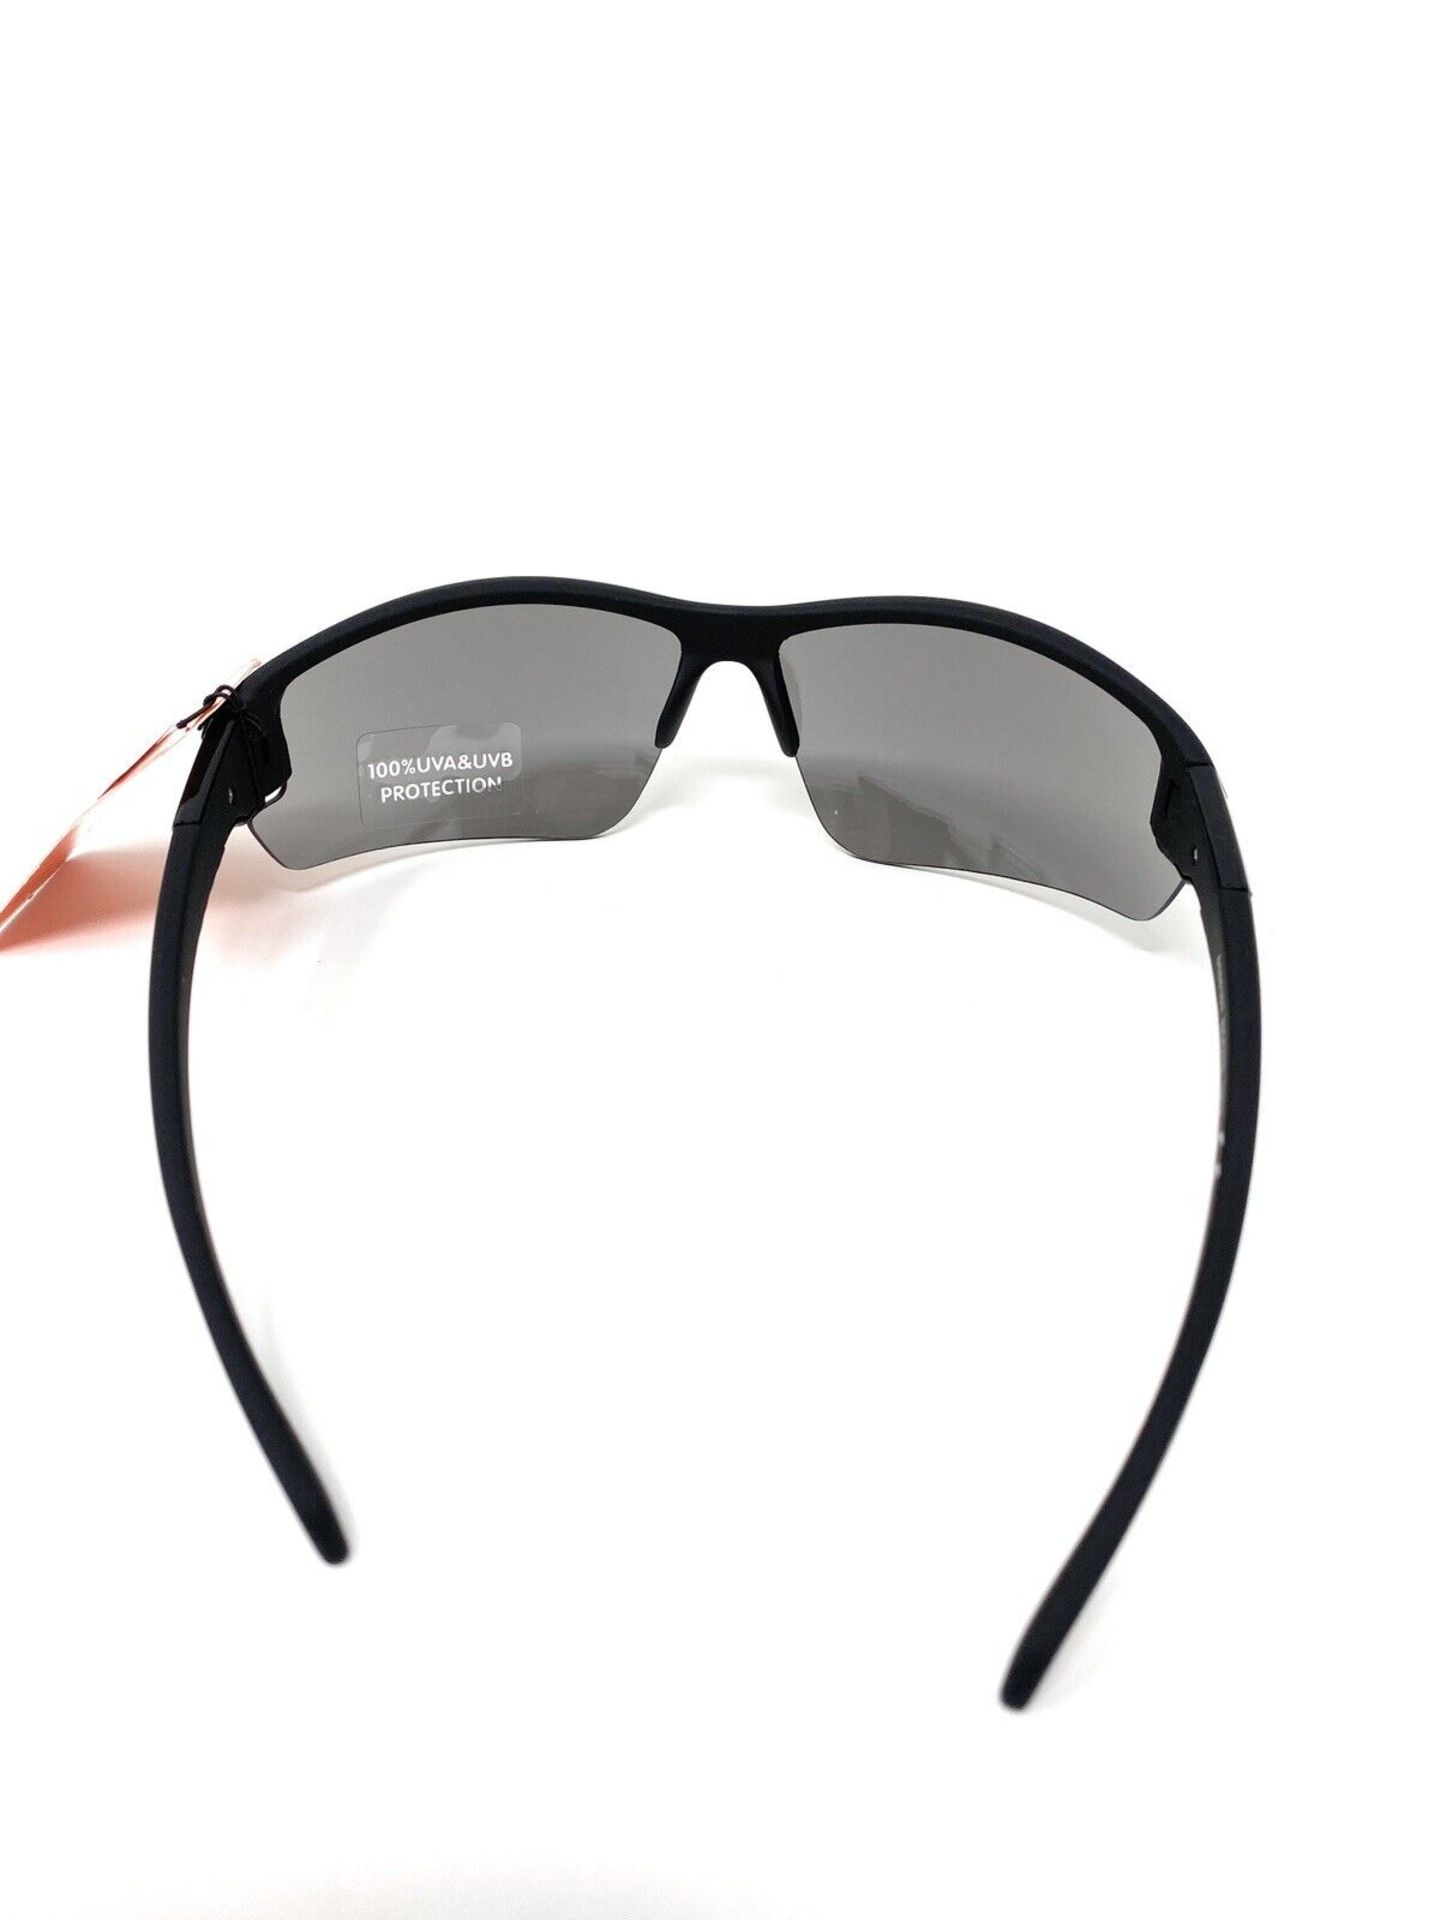 20 x Boots Active Sports Styled Sunglasses 100% UVA - (NEW) - BOOTS RRP Â£500 ! - Image 5 of 5